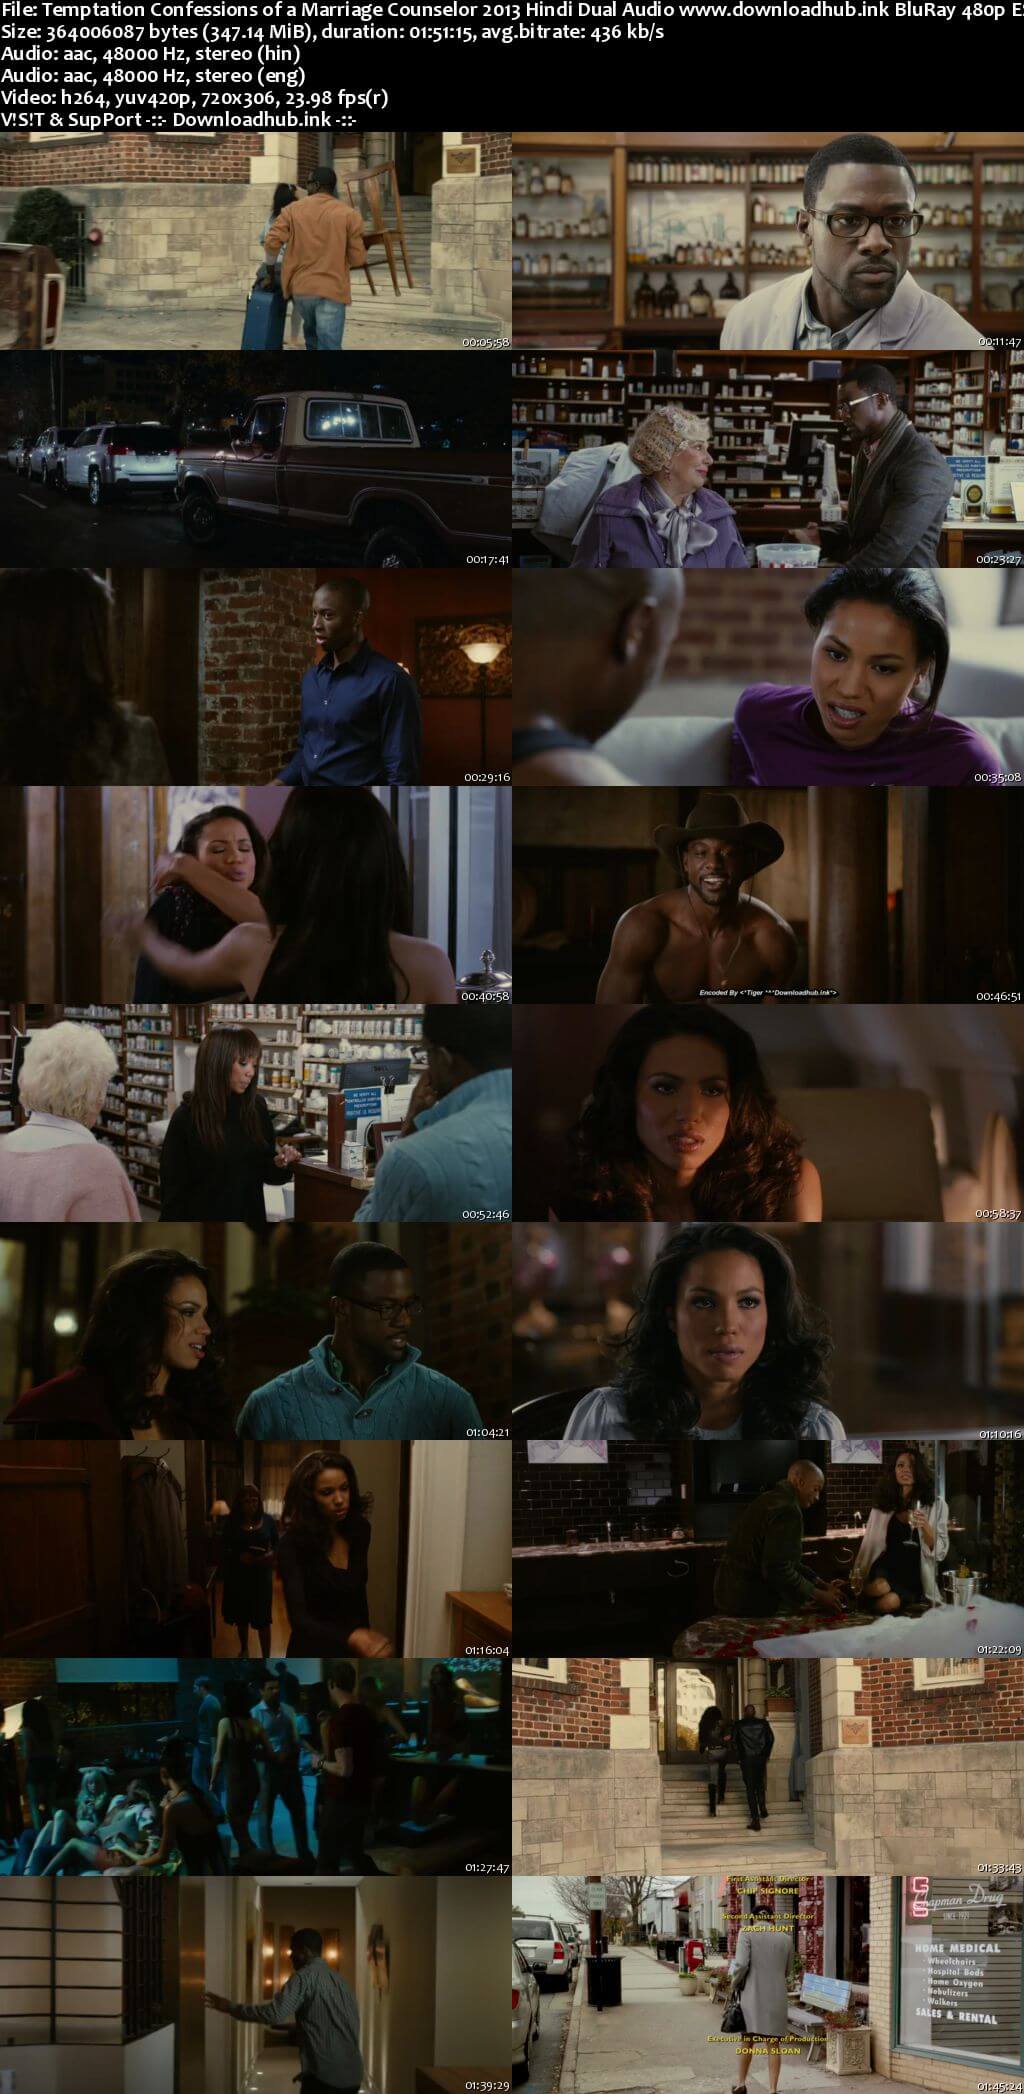 Temptation Confessions of a Marriage Counselor 2013 Hindi Dual Audio 350MB BluRay 480p ESubs